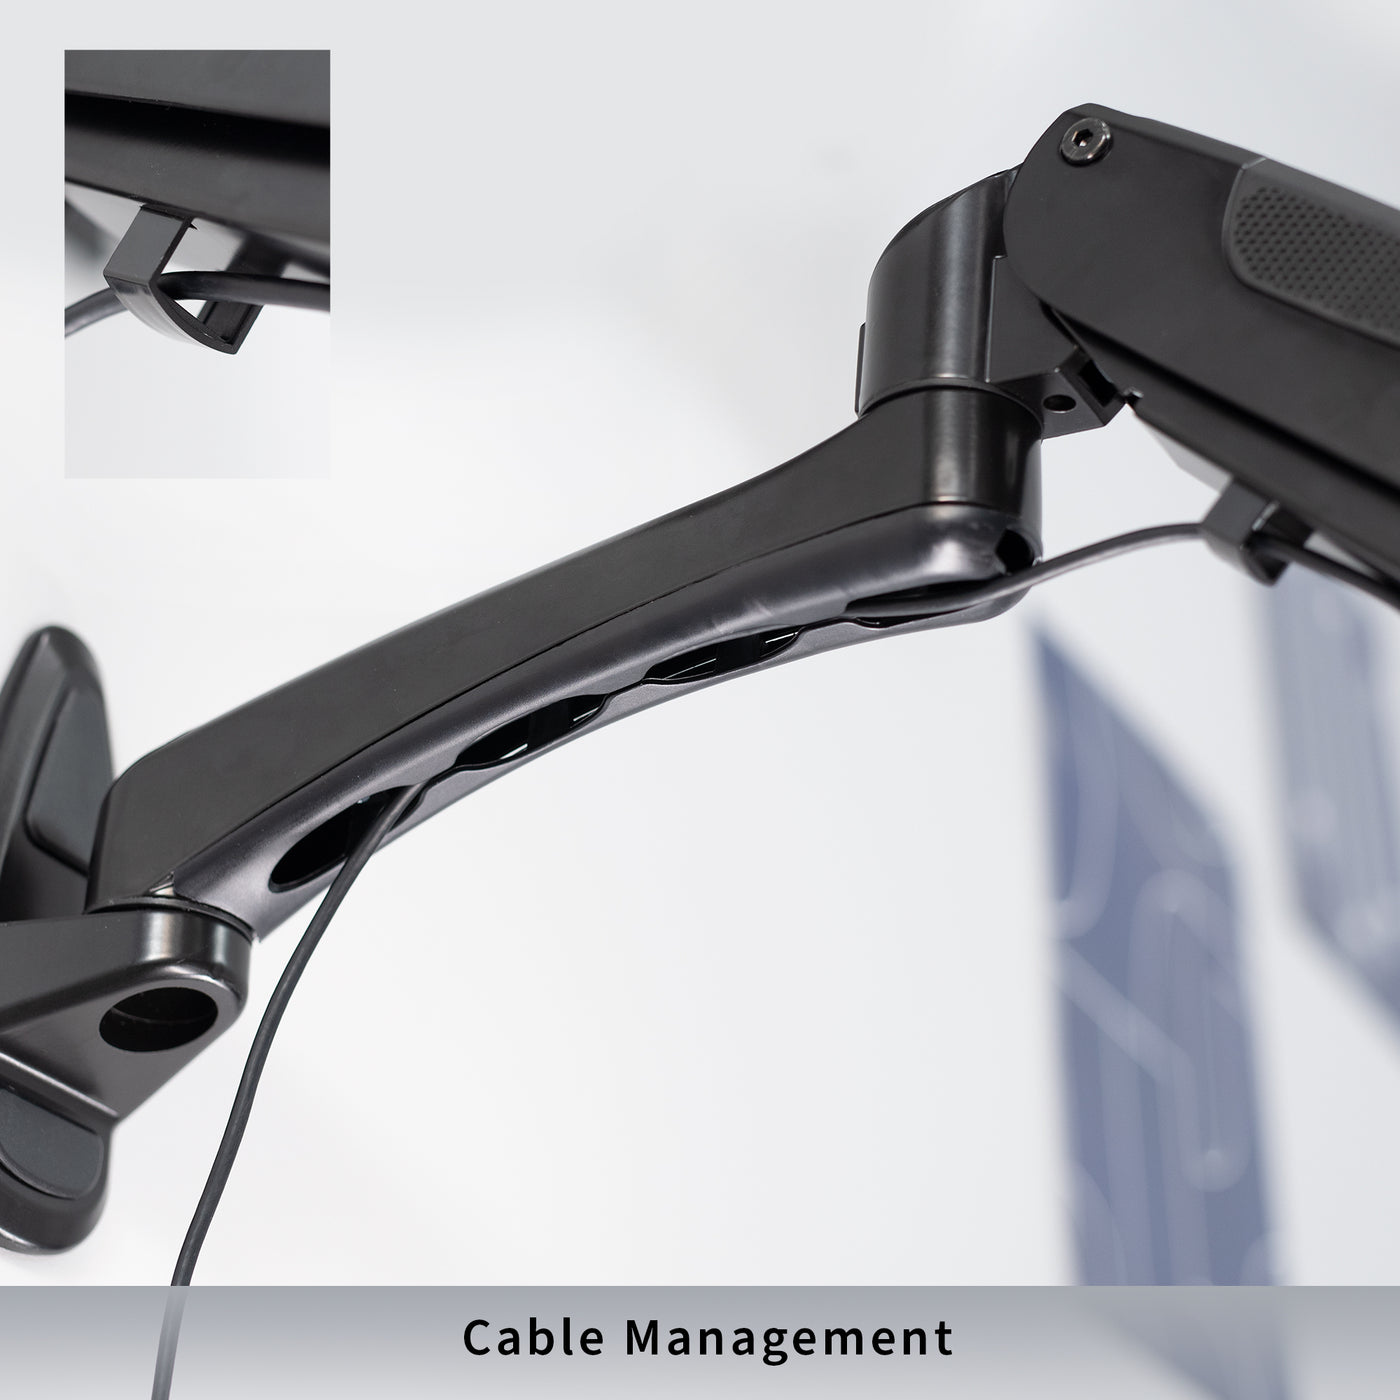 Sturdy steel pneumatic height adjustable keyboard tray wall mount with integrated cable management.